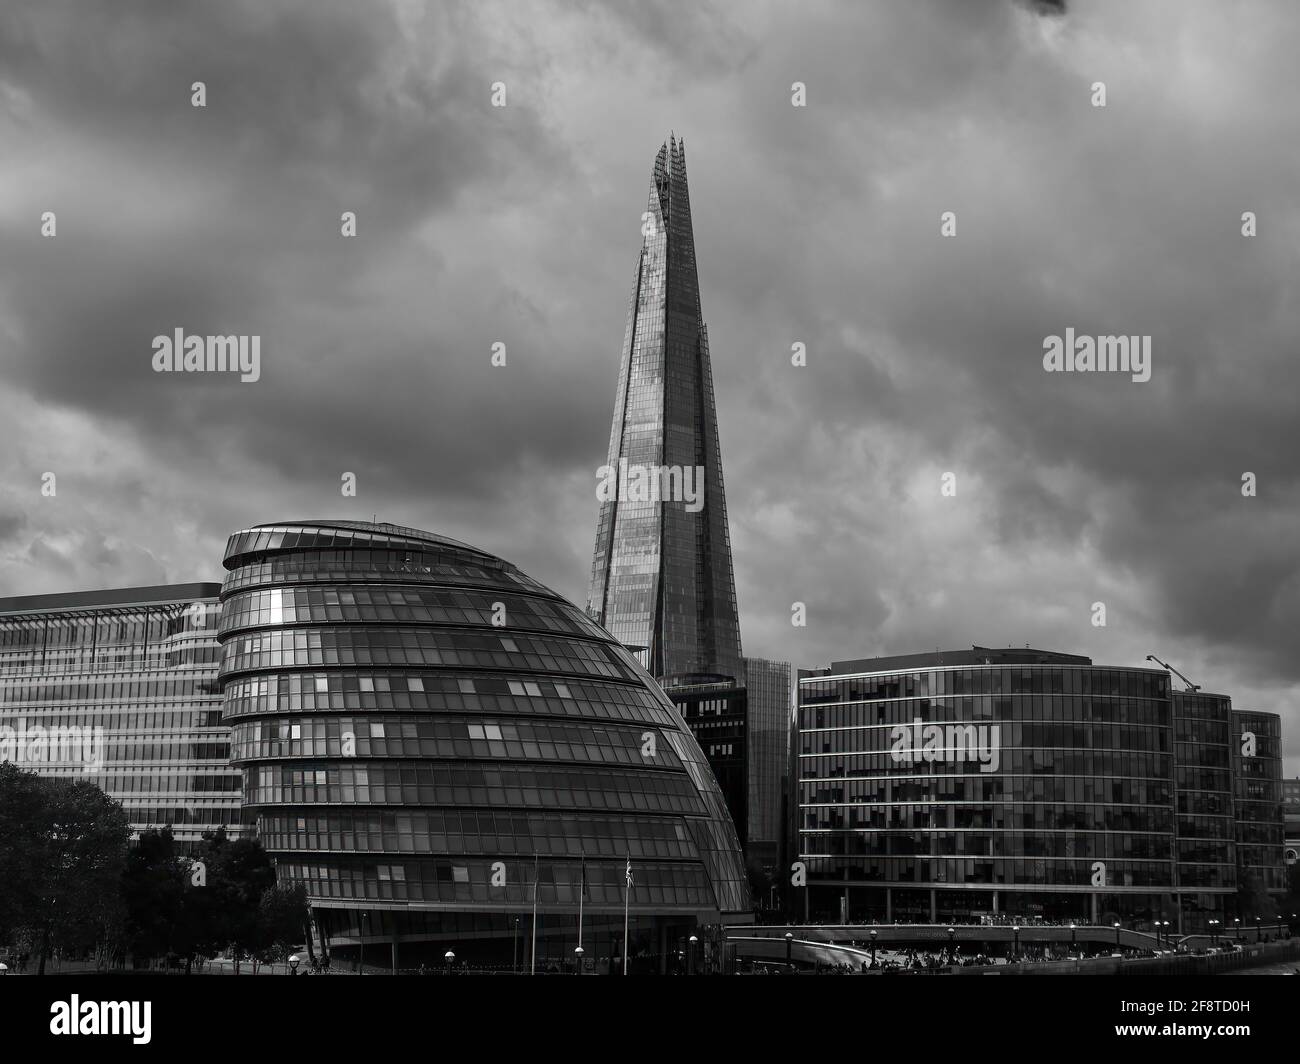 The Greater London Assembly local government complex and the Shard skyscraper ahead of a dramatic and moodily cloudy sky. Stock Photo